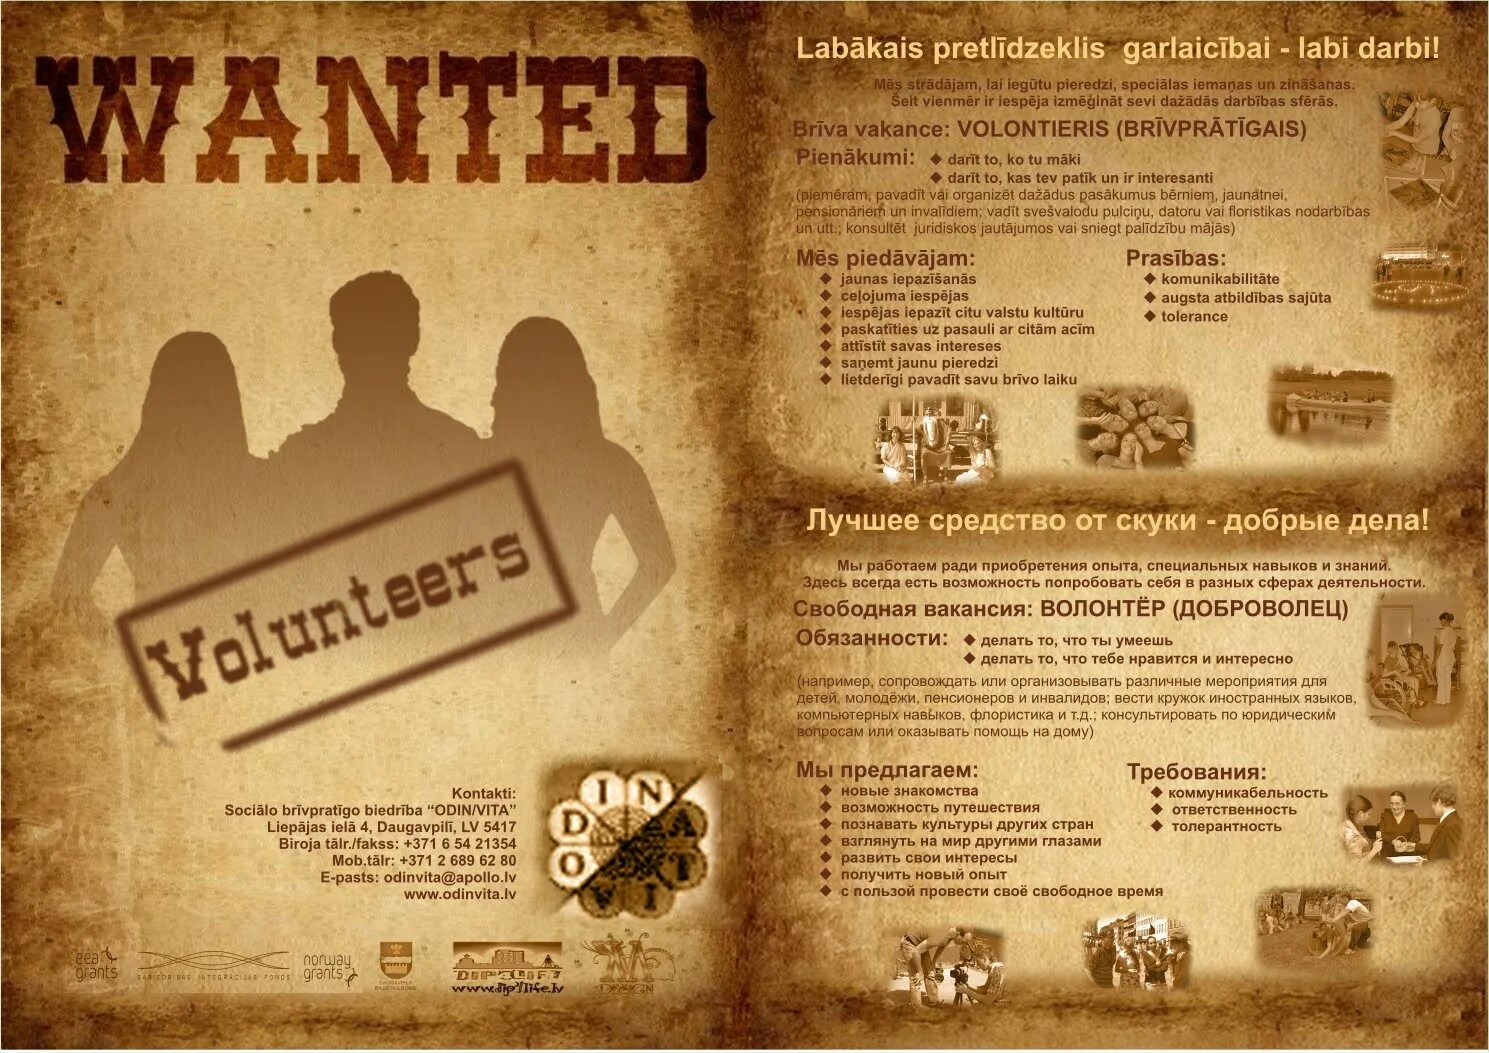 Wanted fan. Wanted объявление. Wanted картинка. Афиша wanted. Рамка wanted.